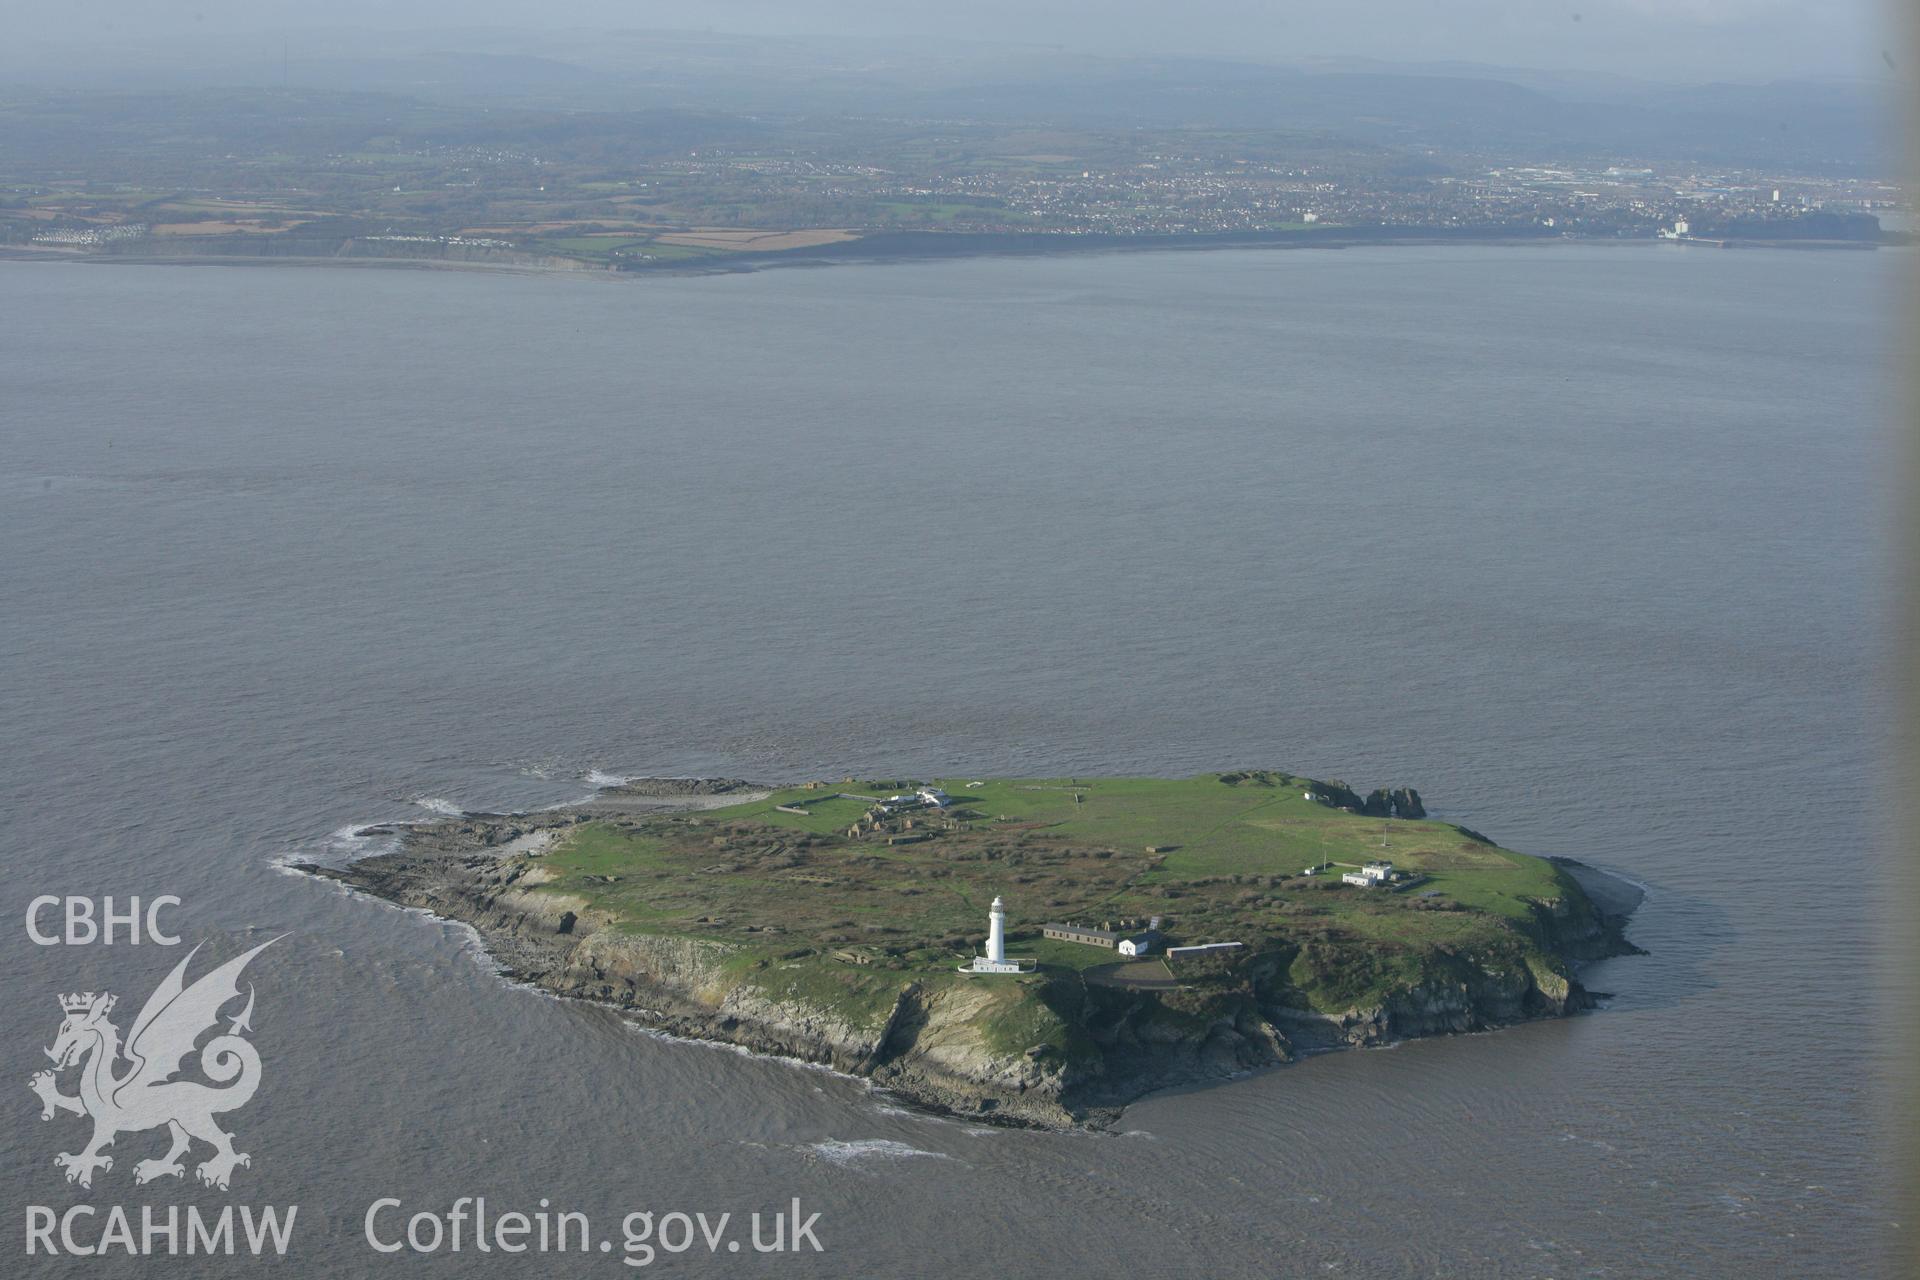 RCAHMW colour oblique photograph of Flat Holm. Taken by Toby Driver on 12/11/2008.